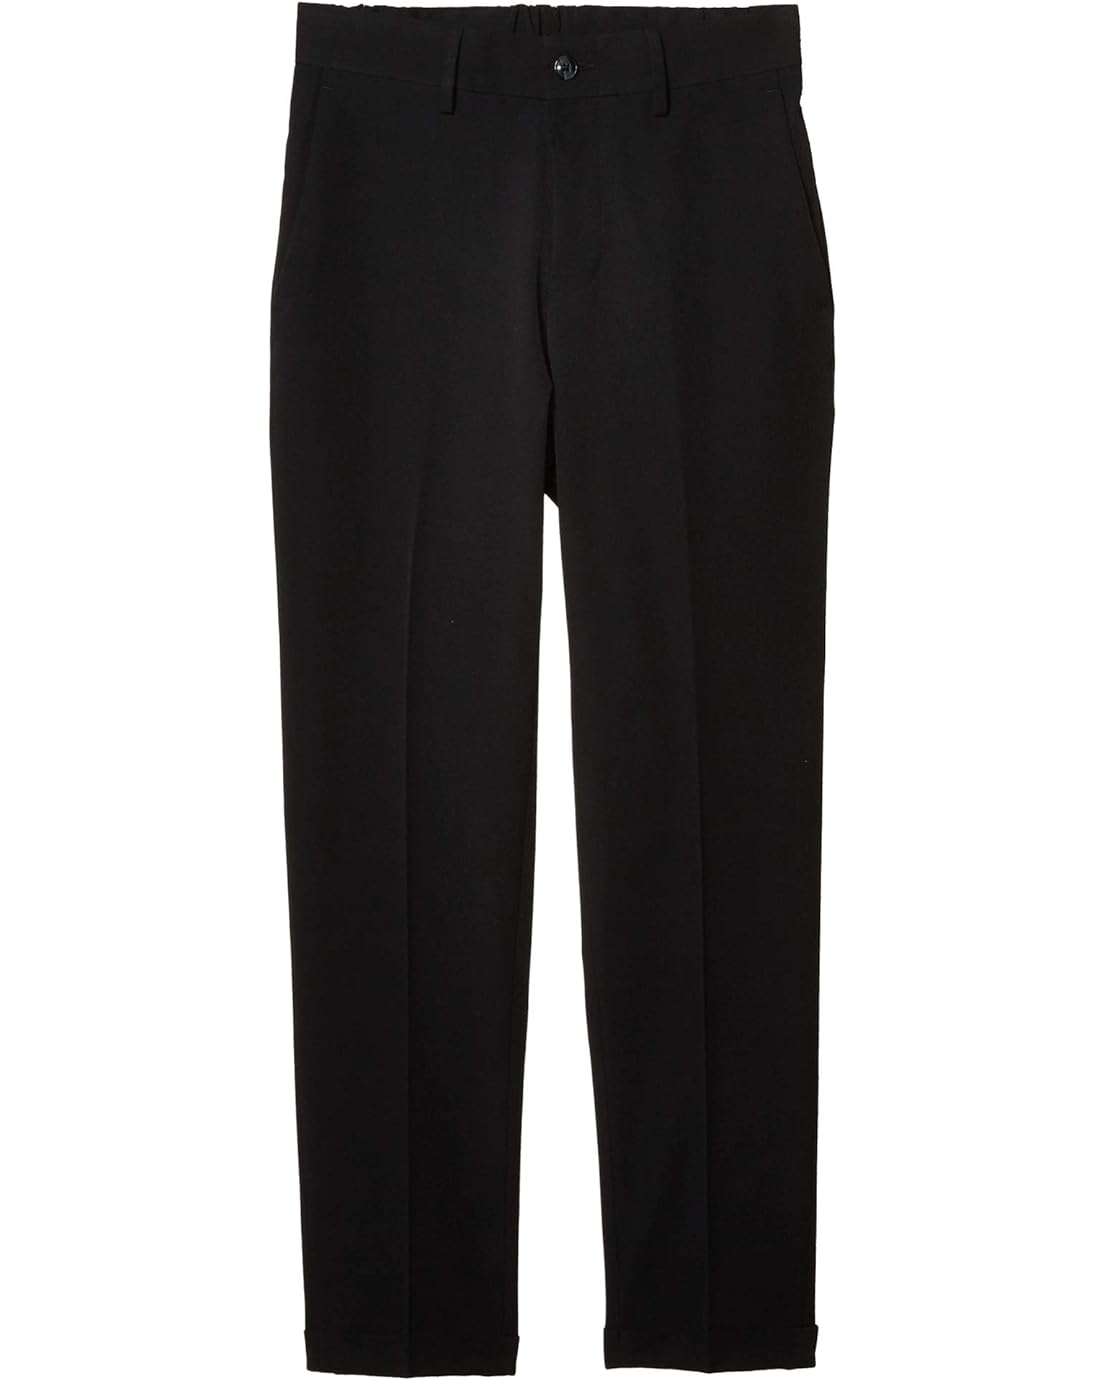 Kenneth Cole Reaction Stretch Solid Drawstring Slim Fit Flat Front Flex Wasitband Dress Pants